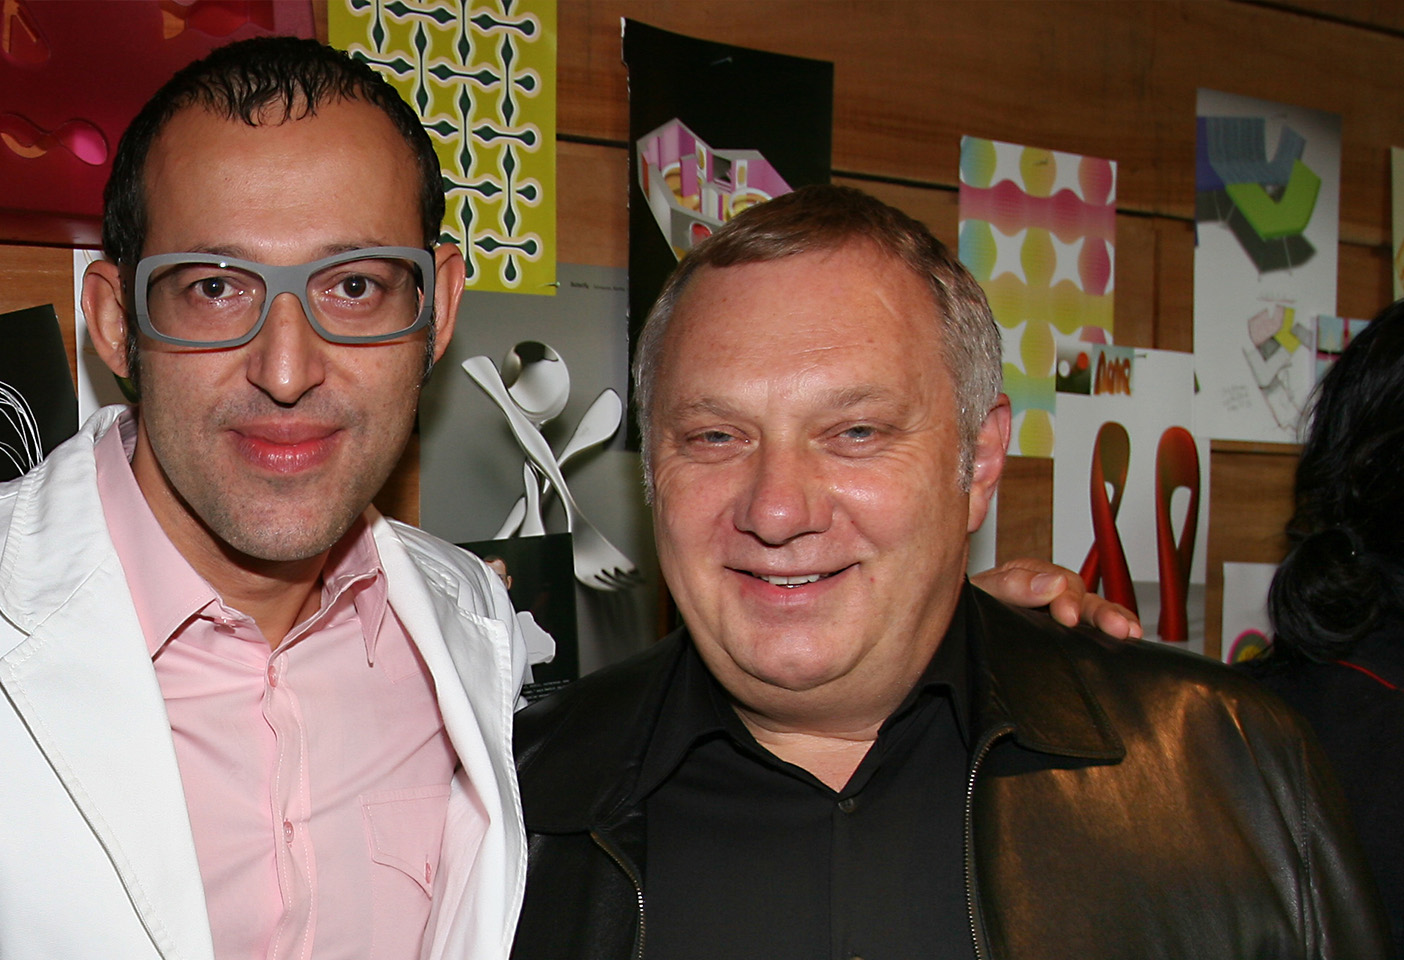 Karim Rashid with Space founder Kevin Jarrett at a Bombay Sapphire Design Award event at Space Sydney. Photo c/o Space.